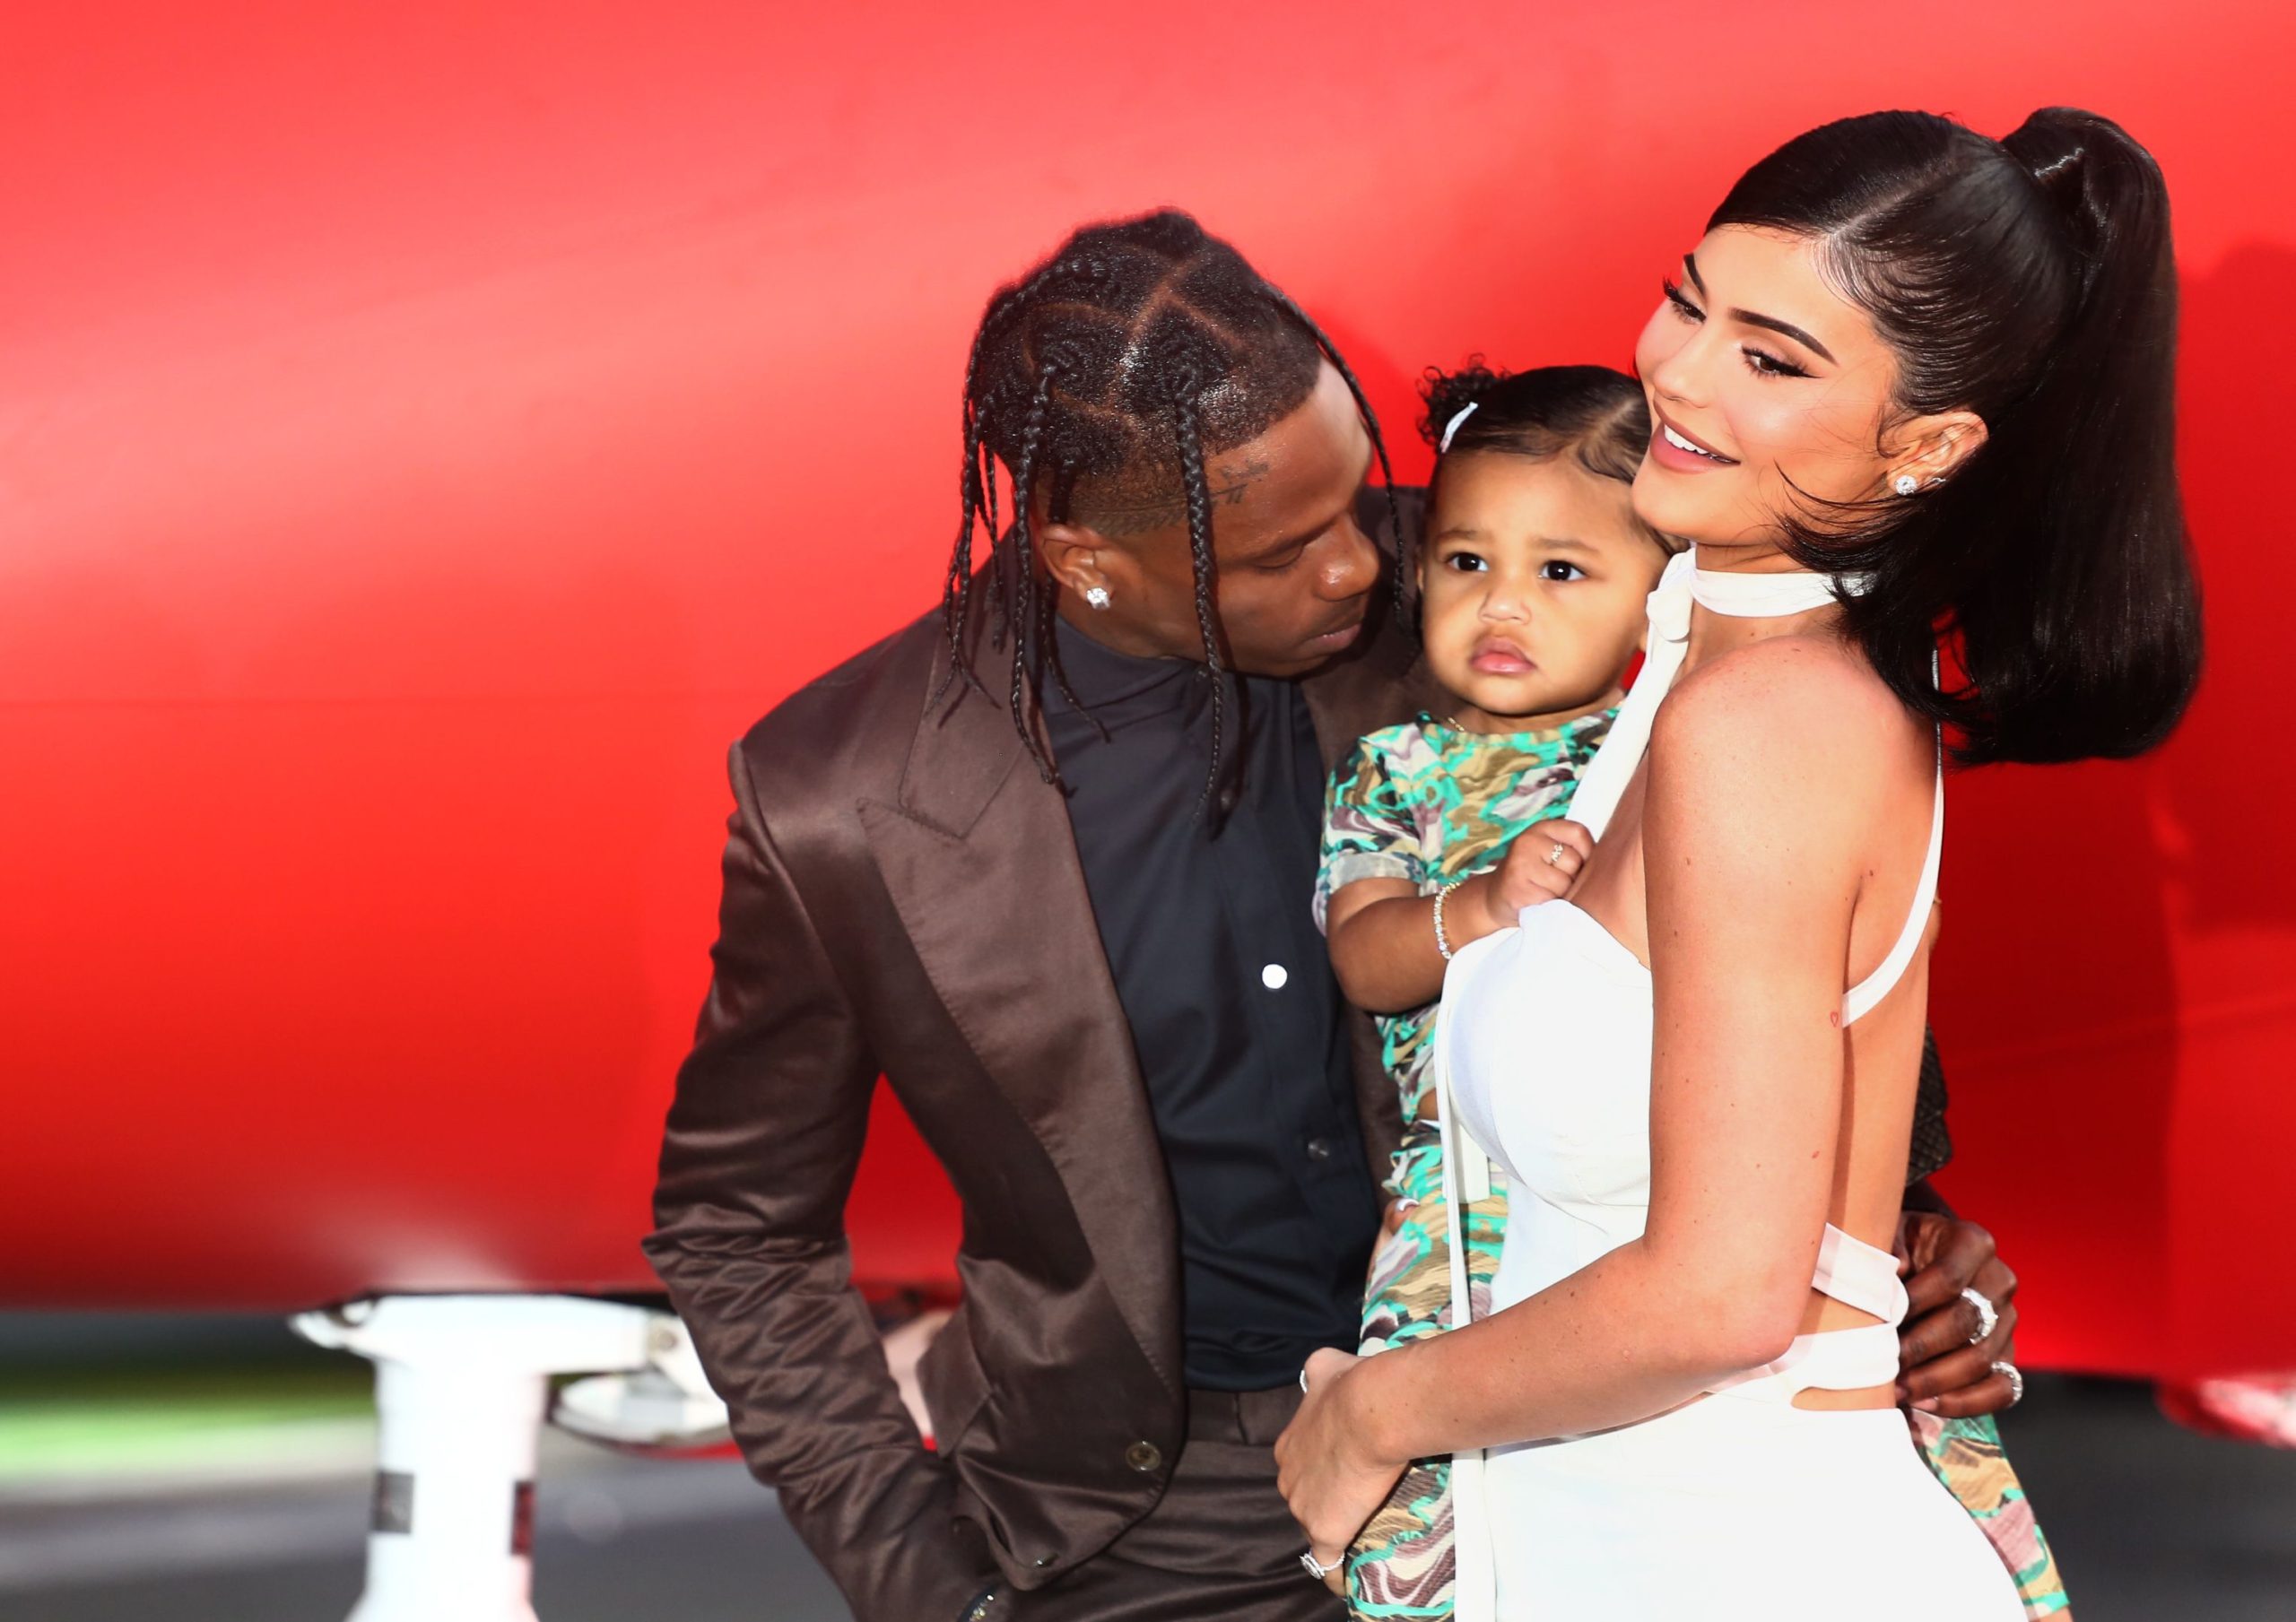 Pregnant Kylie Jenner’s baby daddy Travis Scott ‘wants a BOY this time & has already picked out future son’s name’